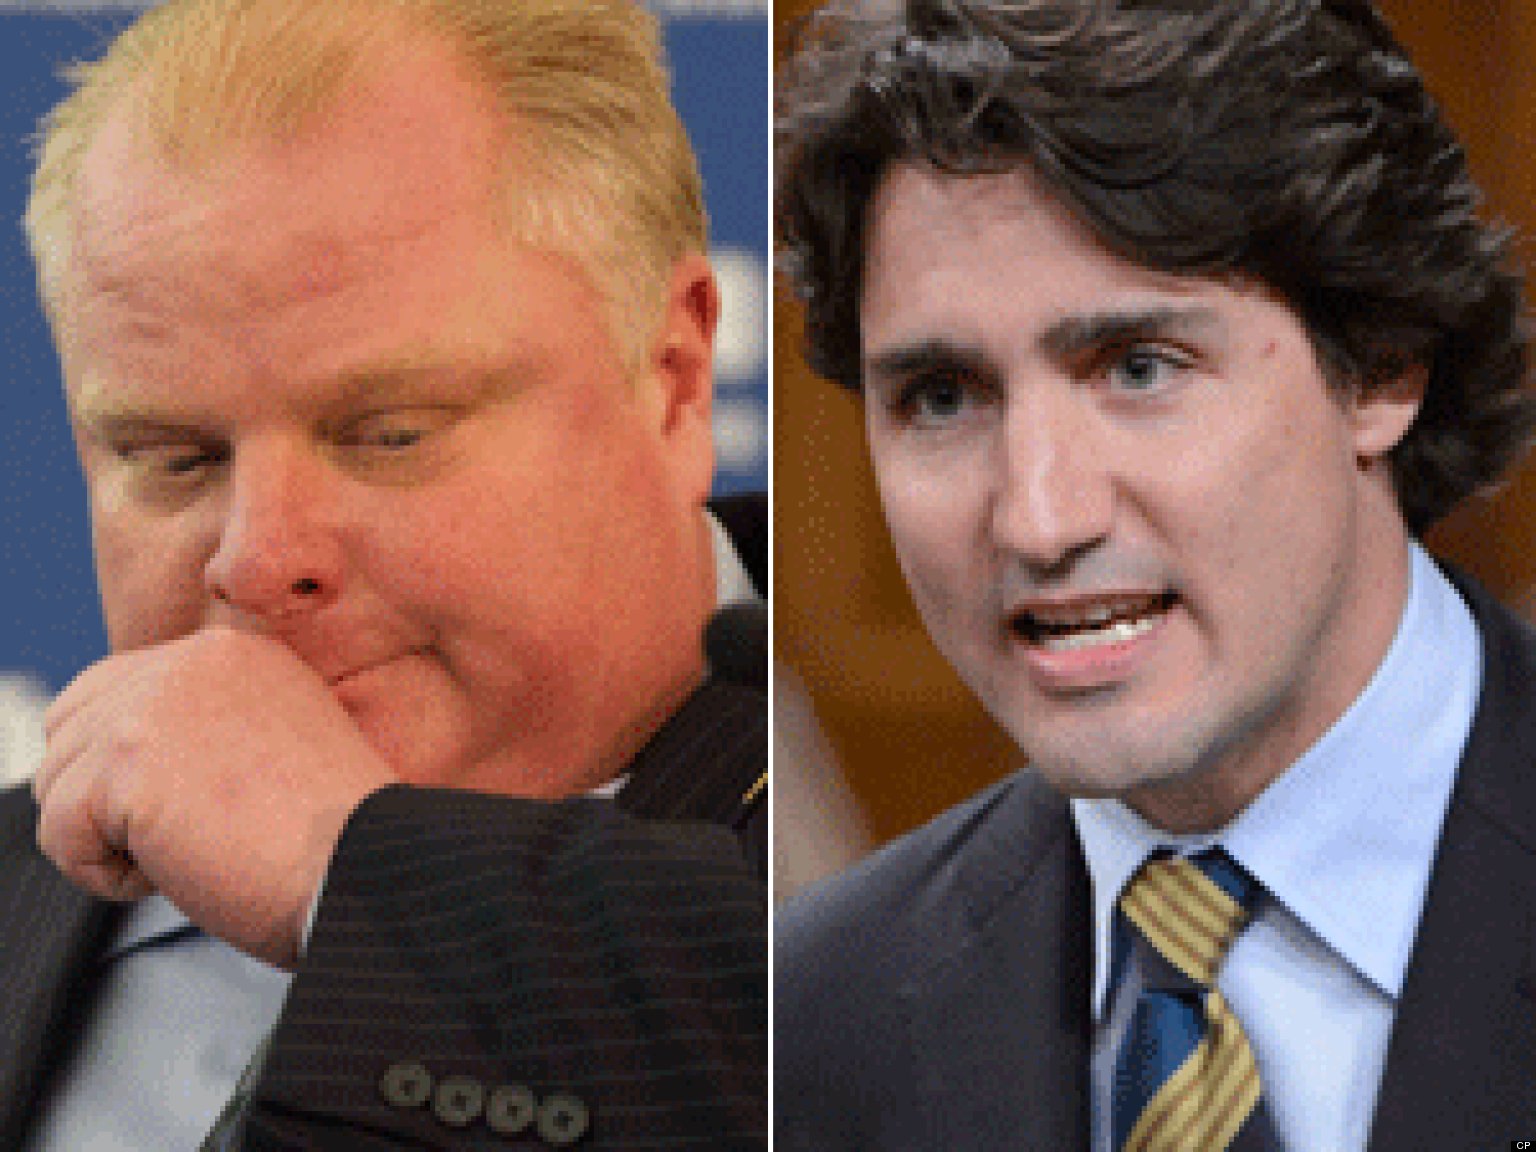 Justin trudeau comments on rob ford #9